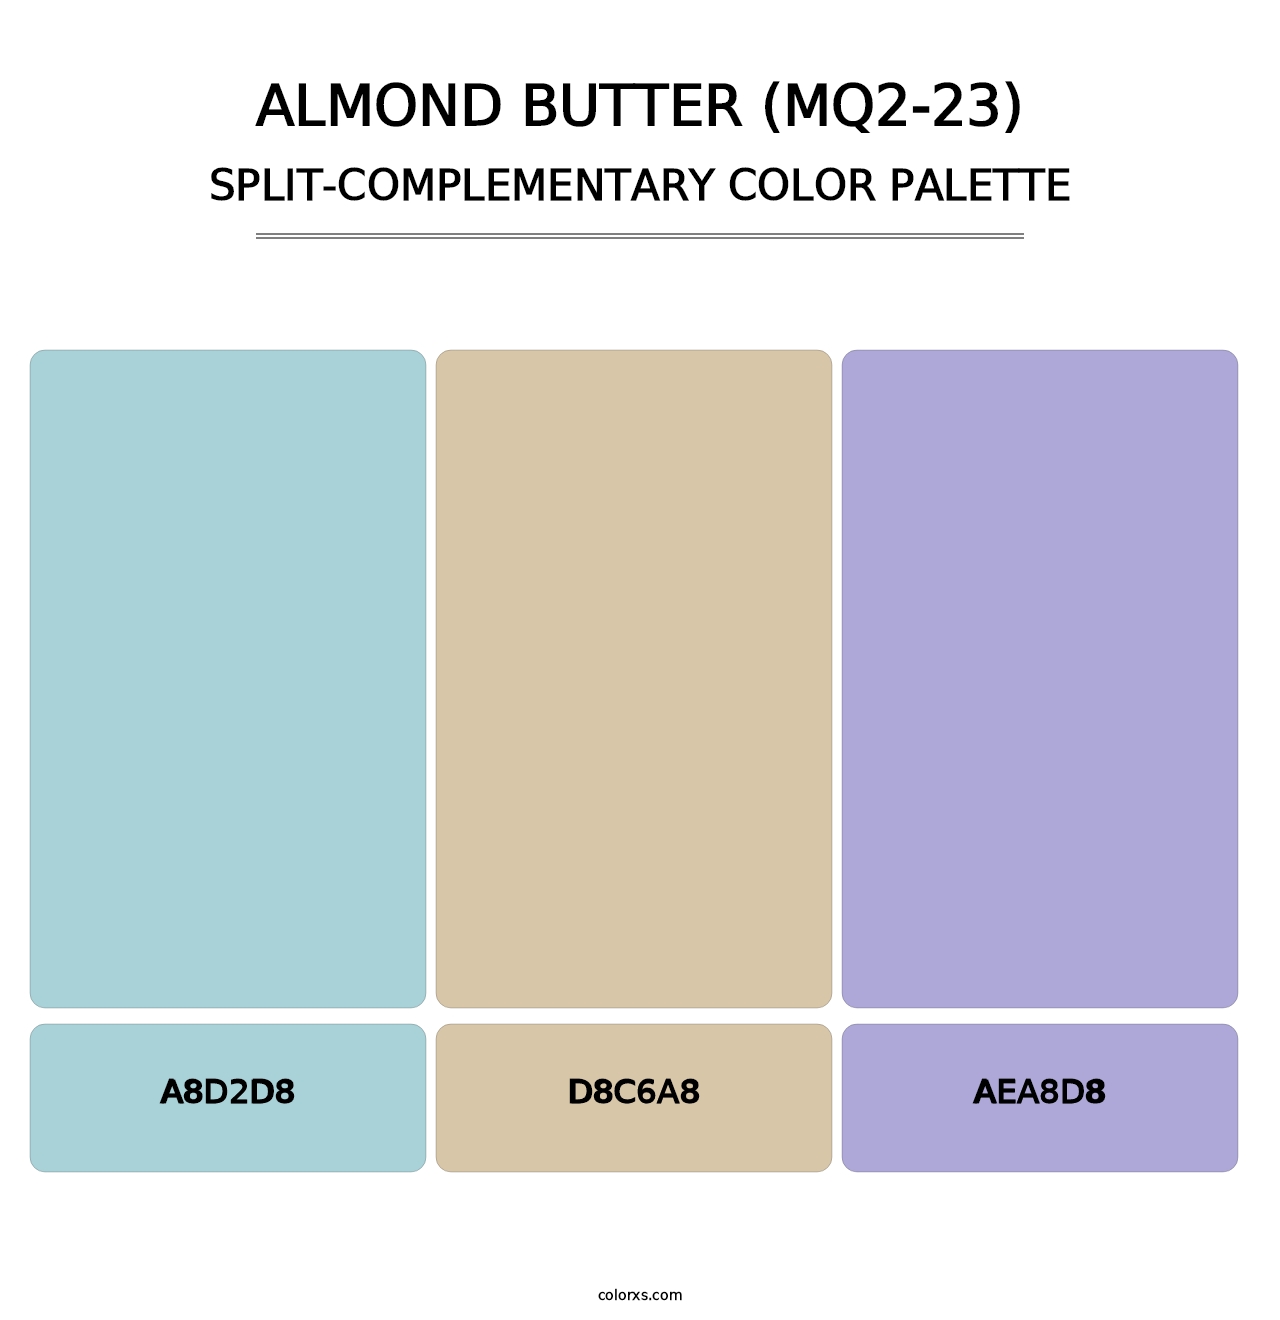 Almond Butter (MQ2-23) - Split-Complementary Color Palette